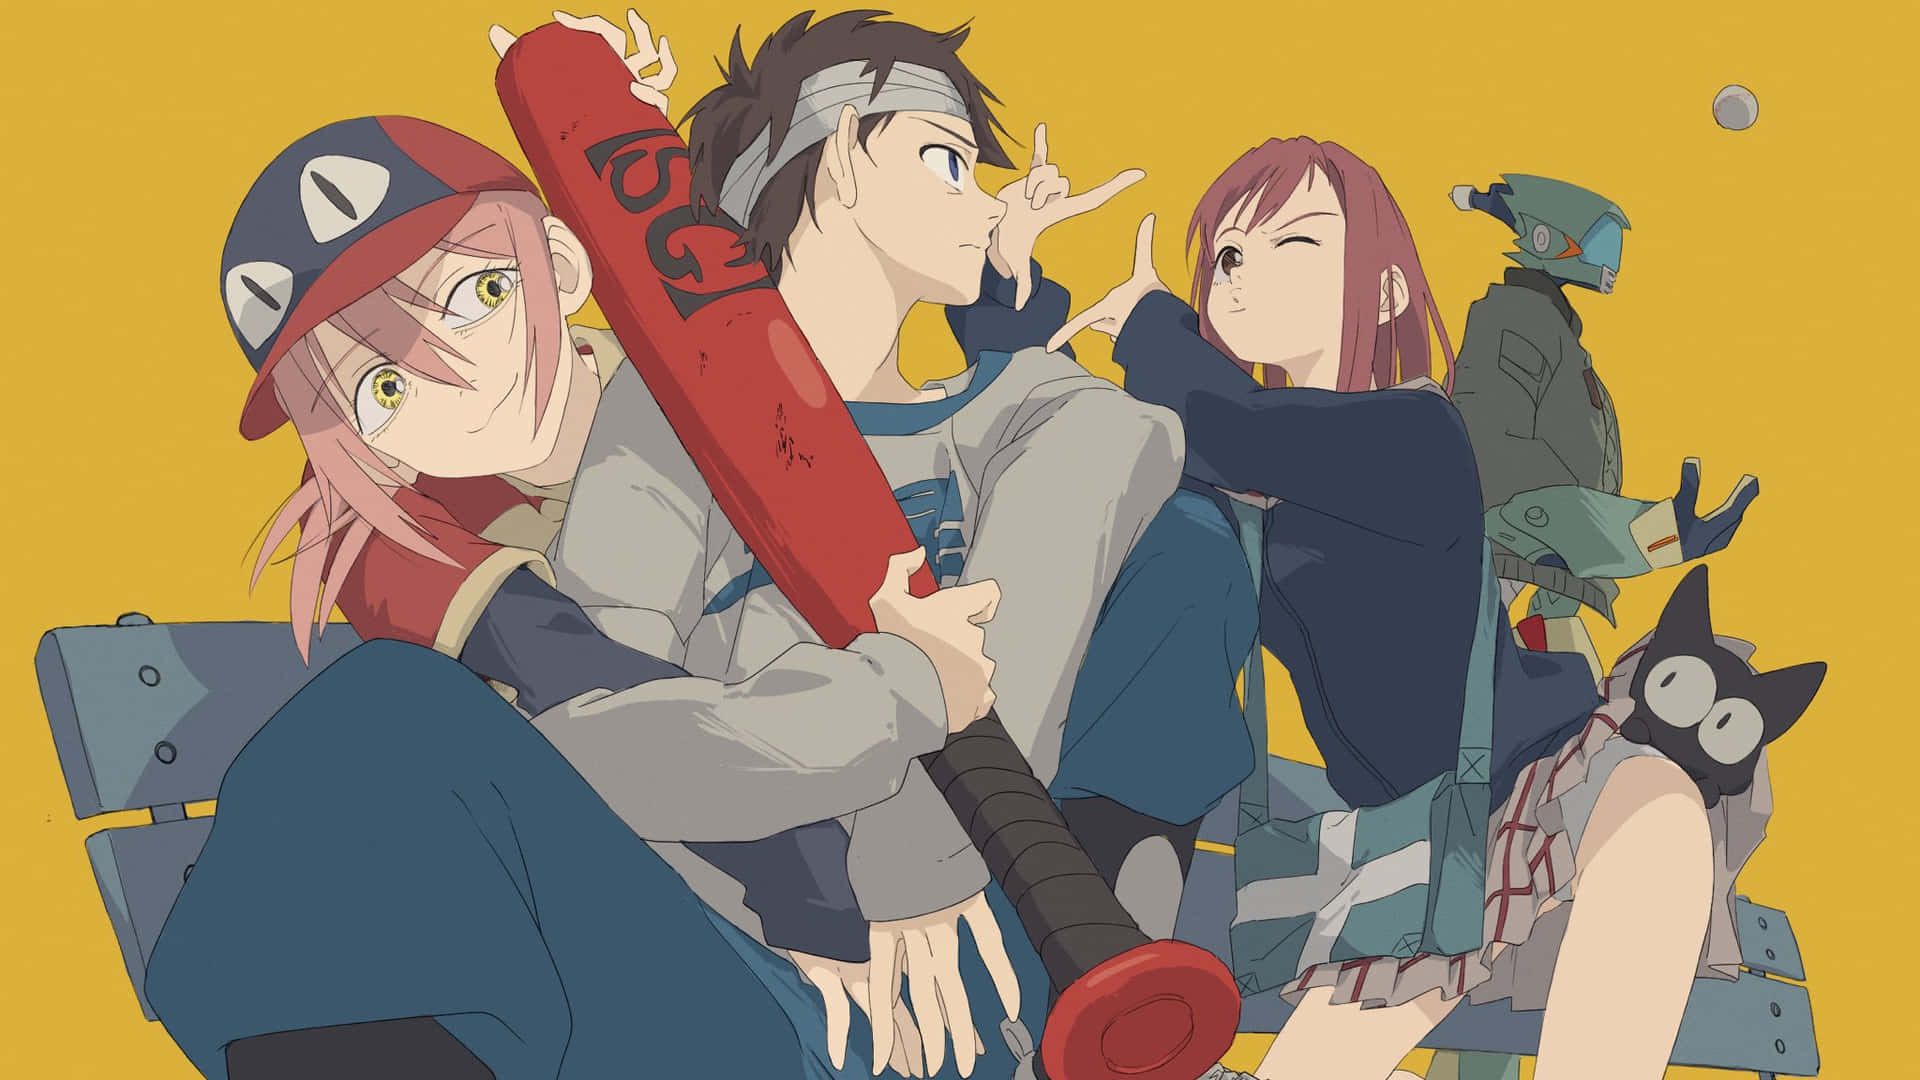 Naota Nandaba striking a thoughtful pose in the mysterious world of FLCL Wallpaper